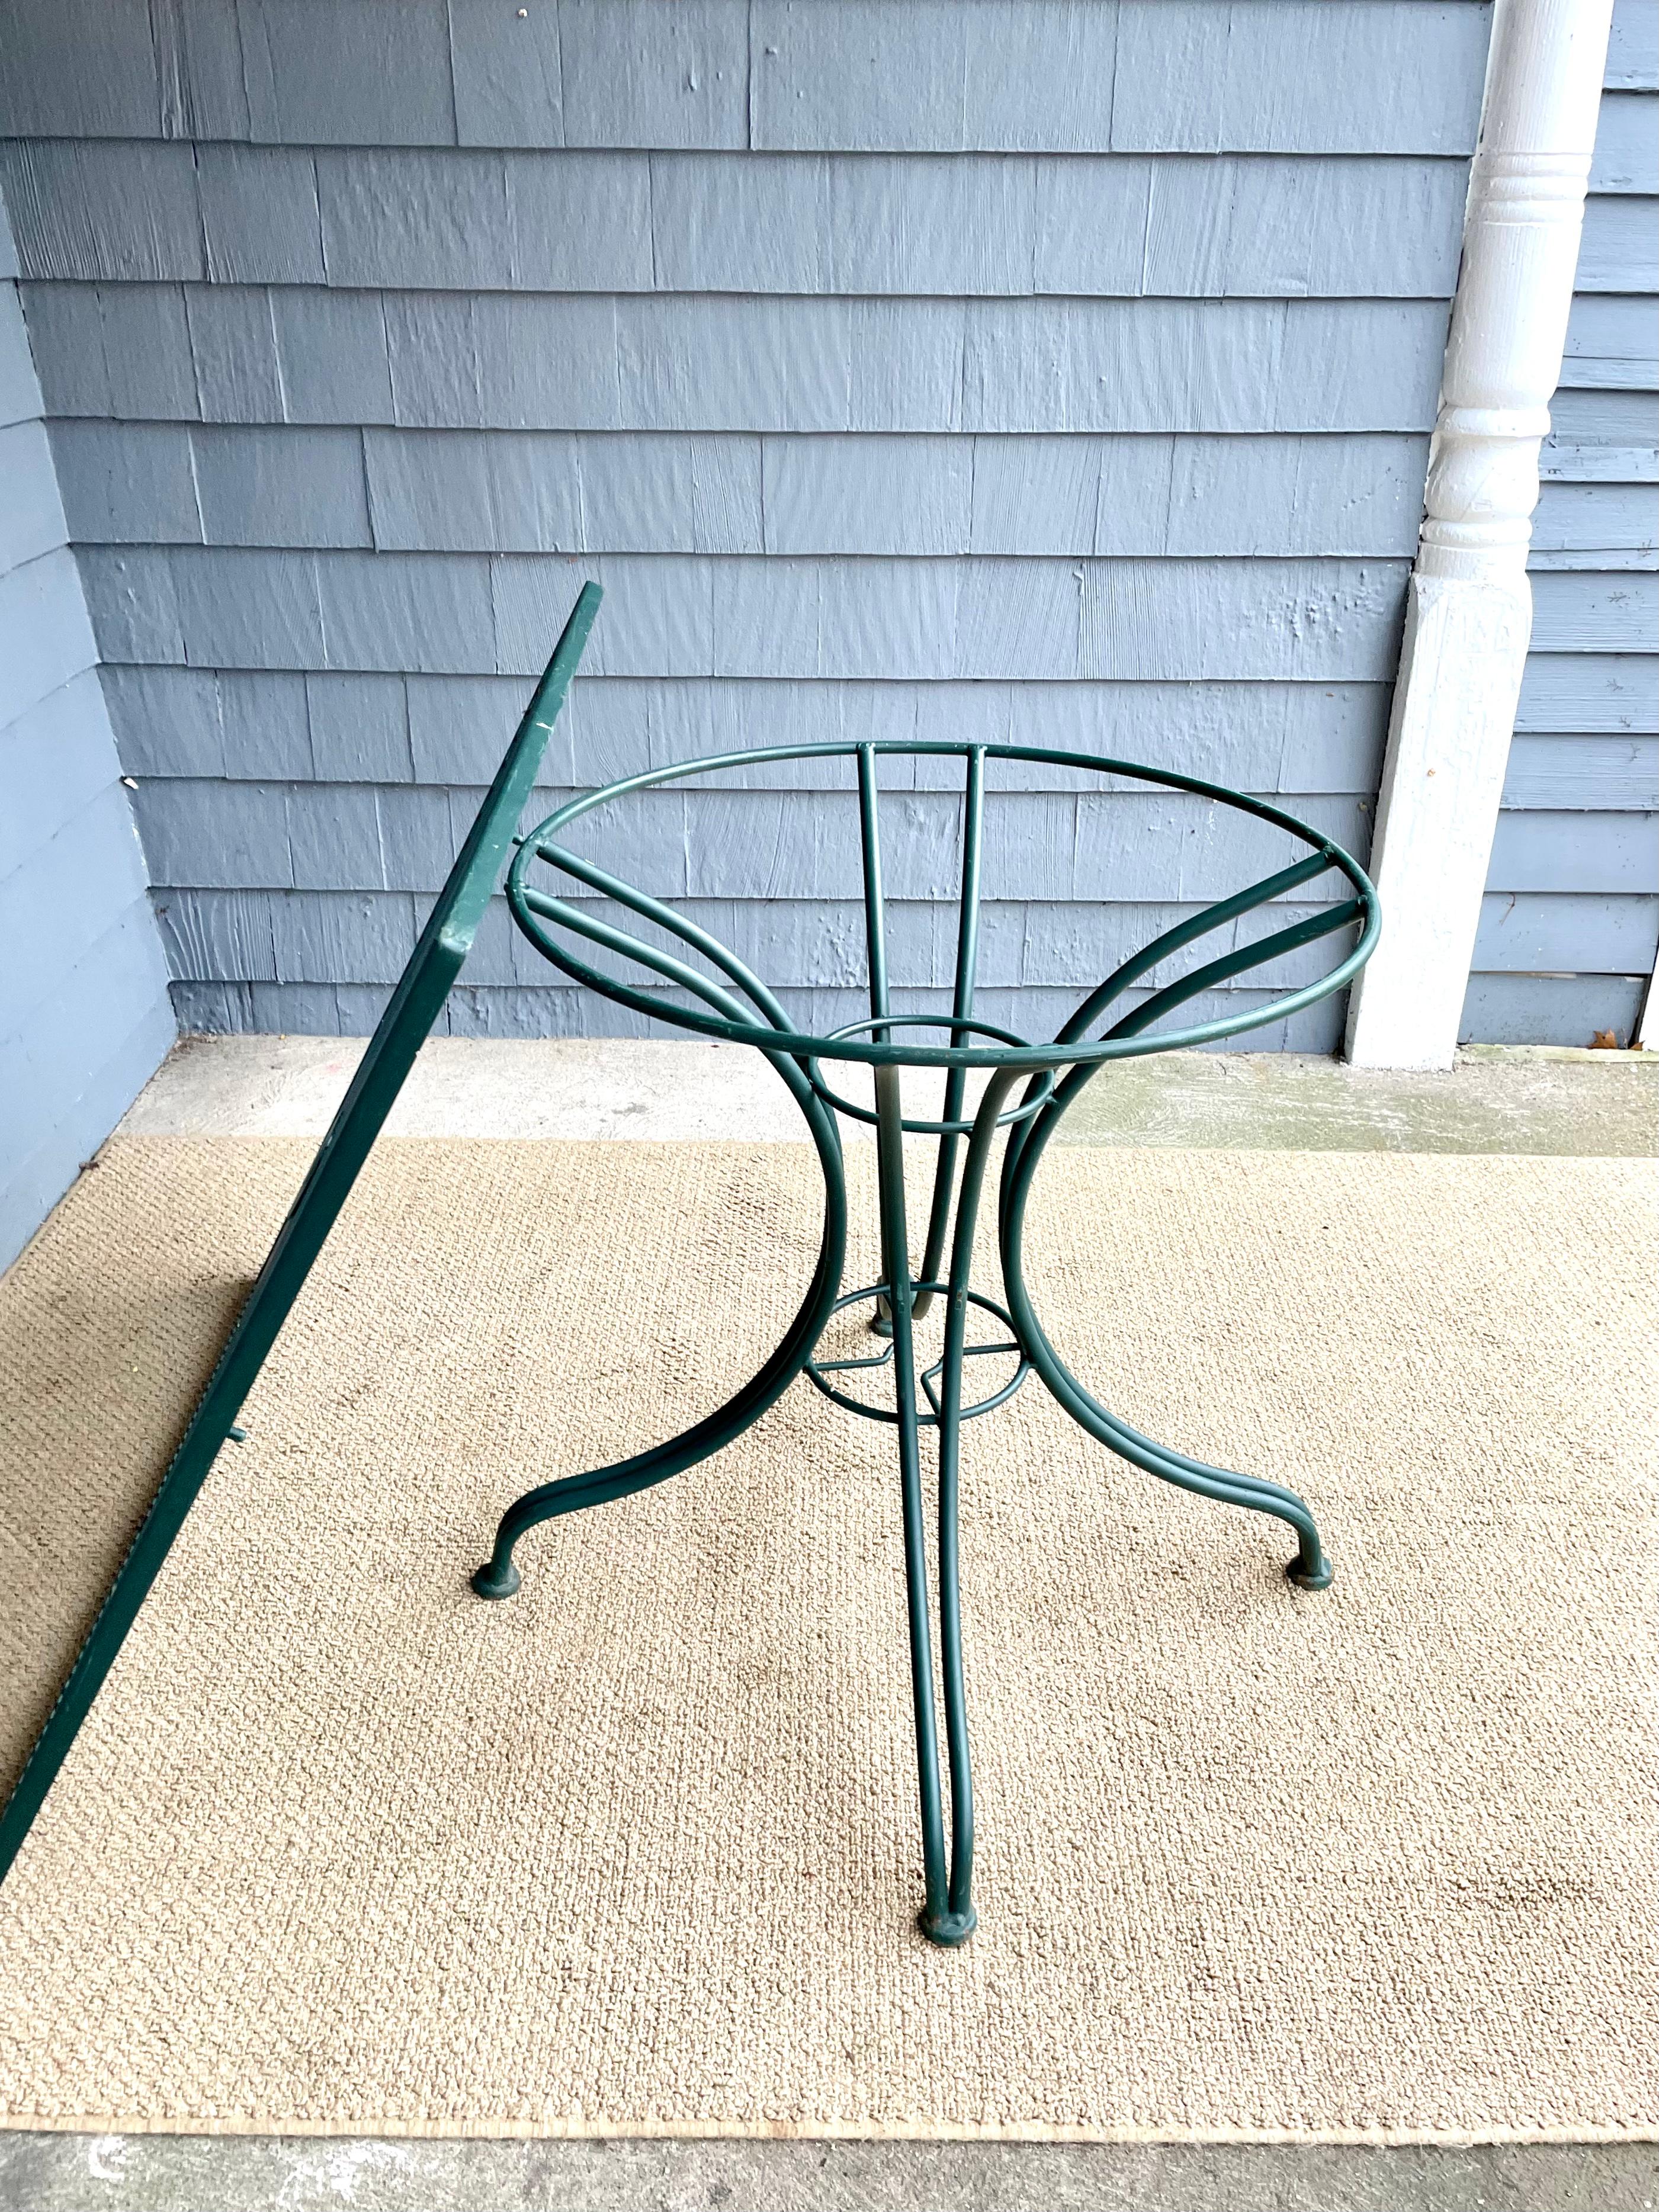 Vintage Wrought Iron Square Outdoor Patio Table  In Good Condition For Sale In Cumberland, RI